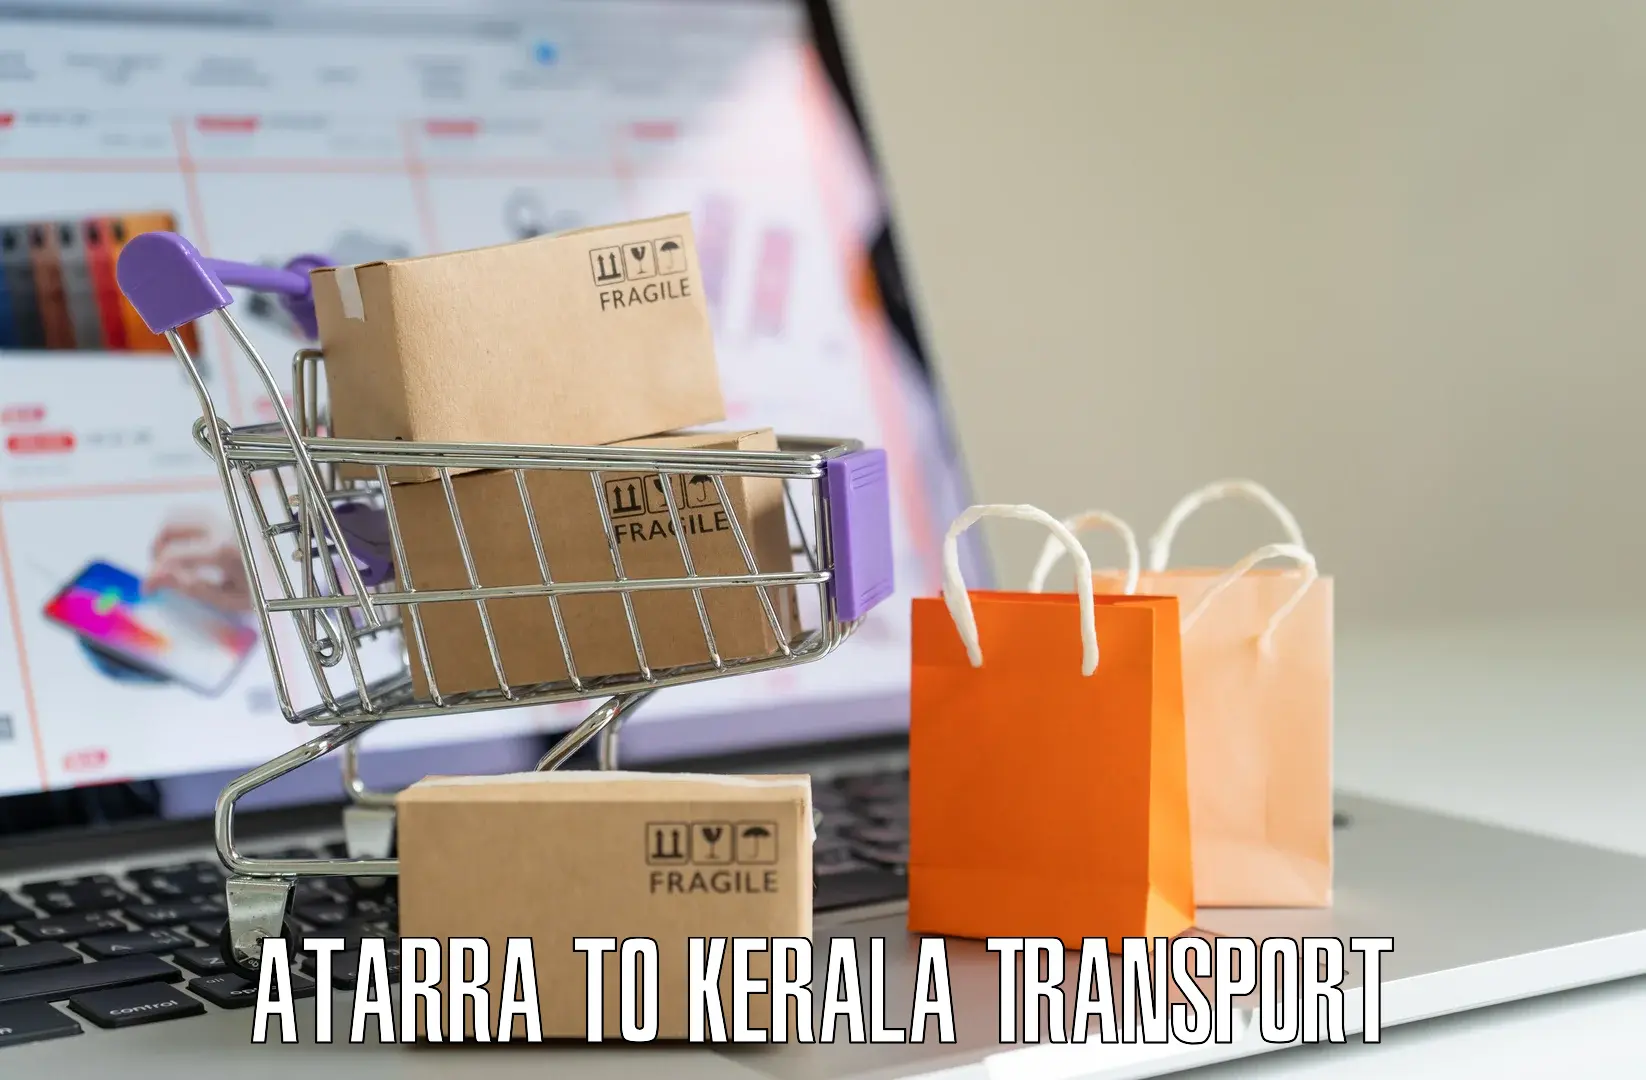 Transport bike from one state to another Atarra to Kerala